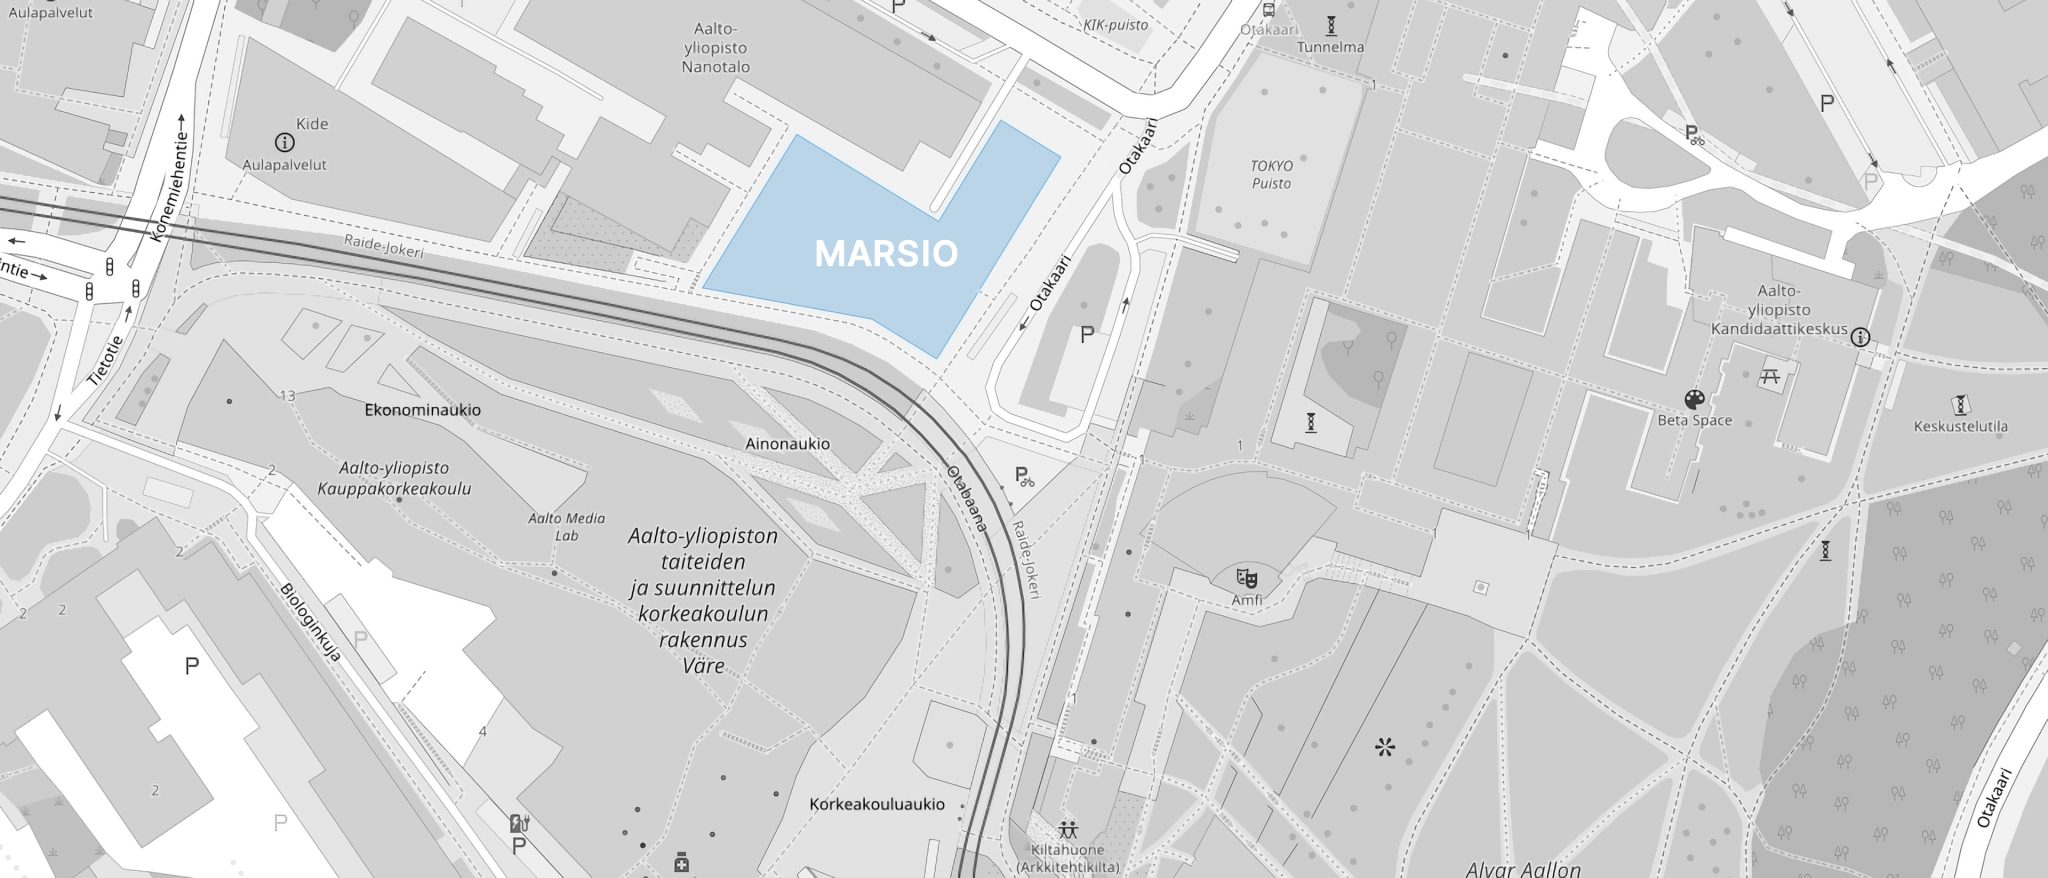 A map view of the Otaniemi campus center